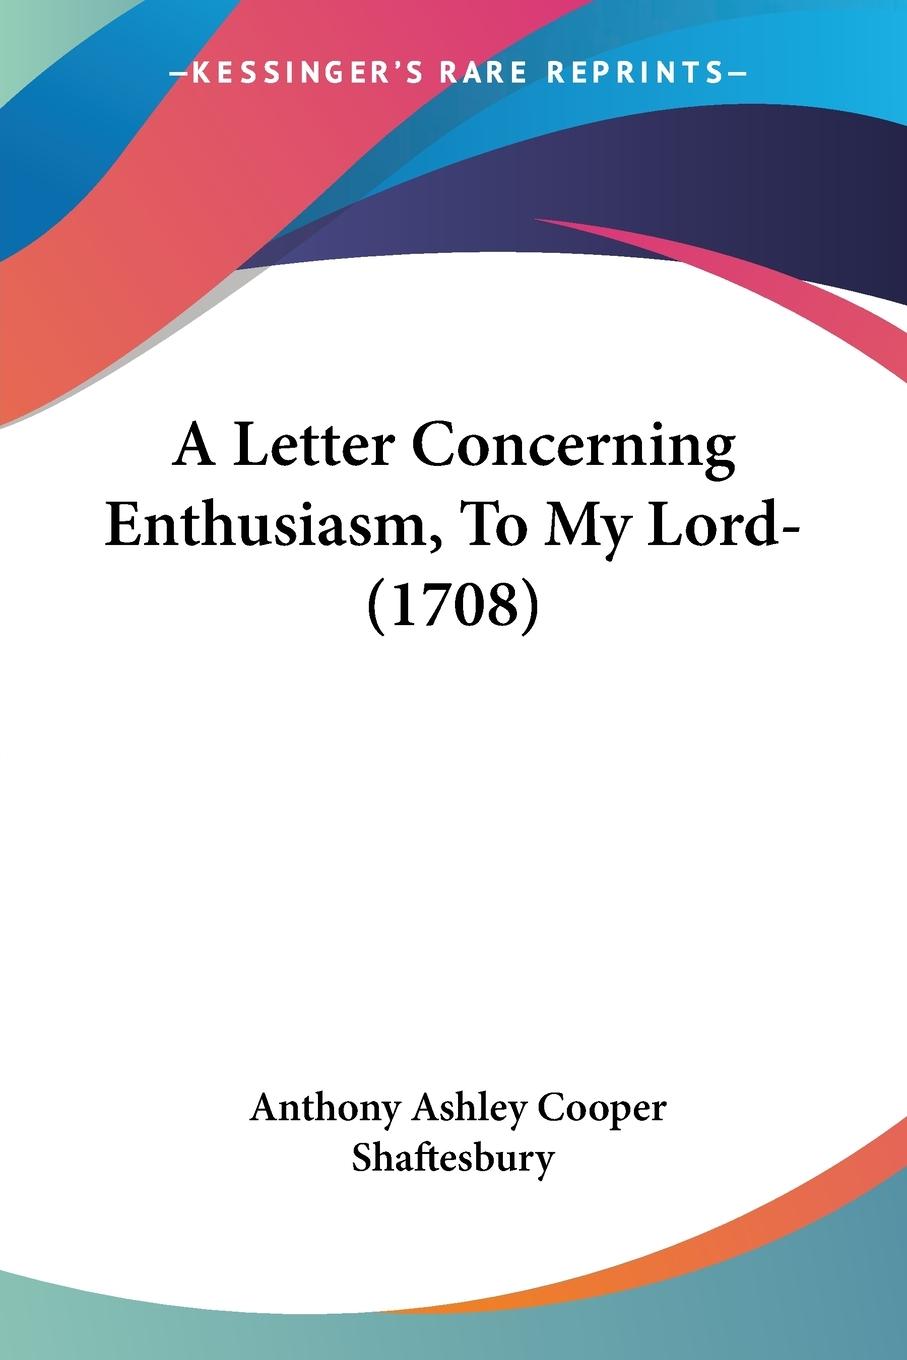 A Letter Concerning Enthusiasm, To My Lord- (1708) - Shaftesbury, Anthony Ashley Cooper